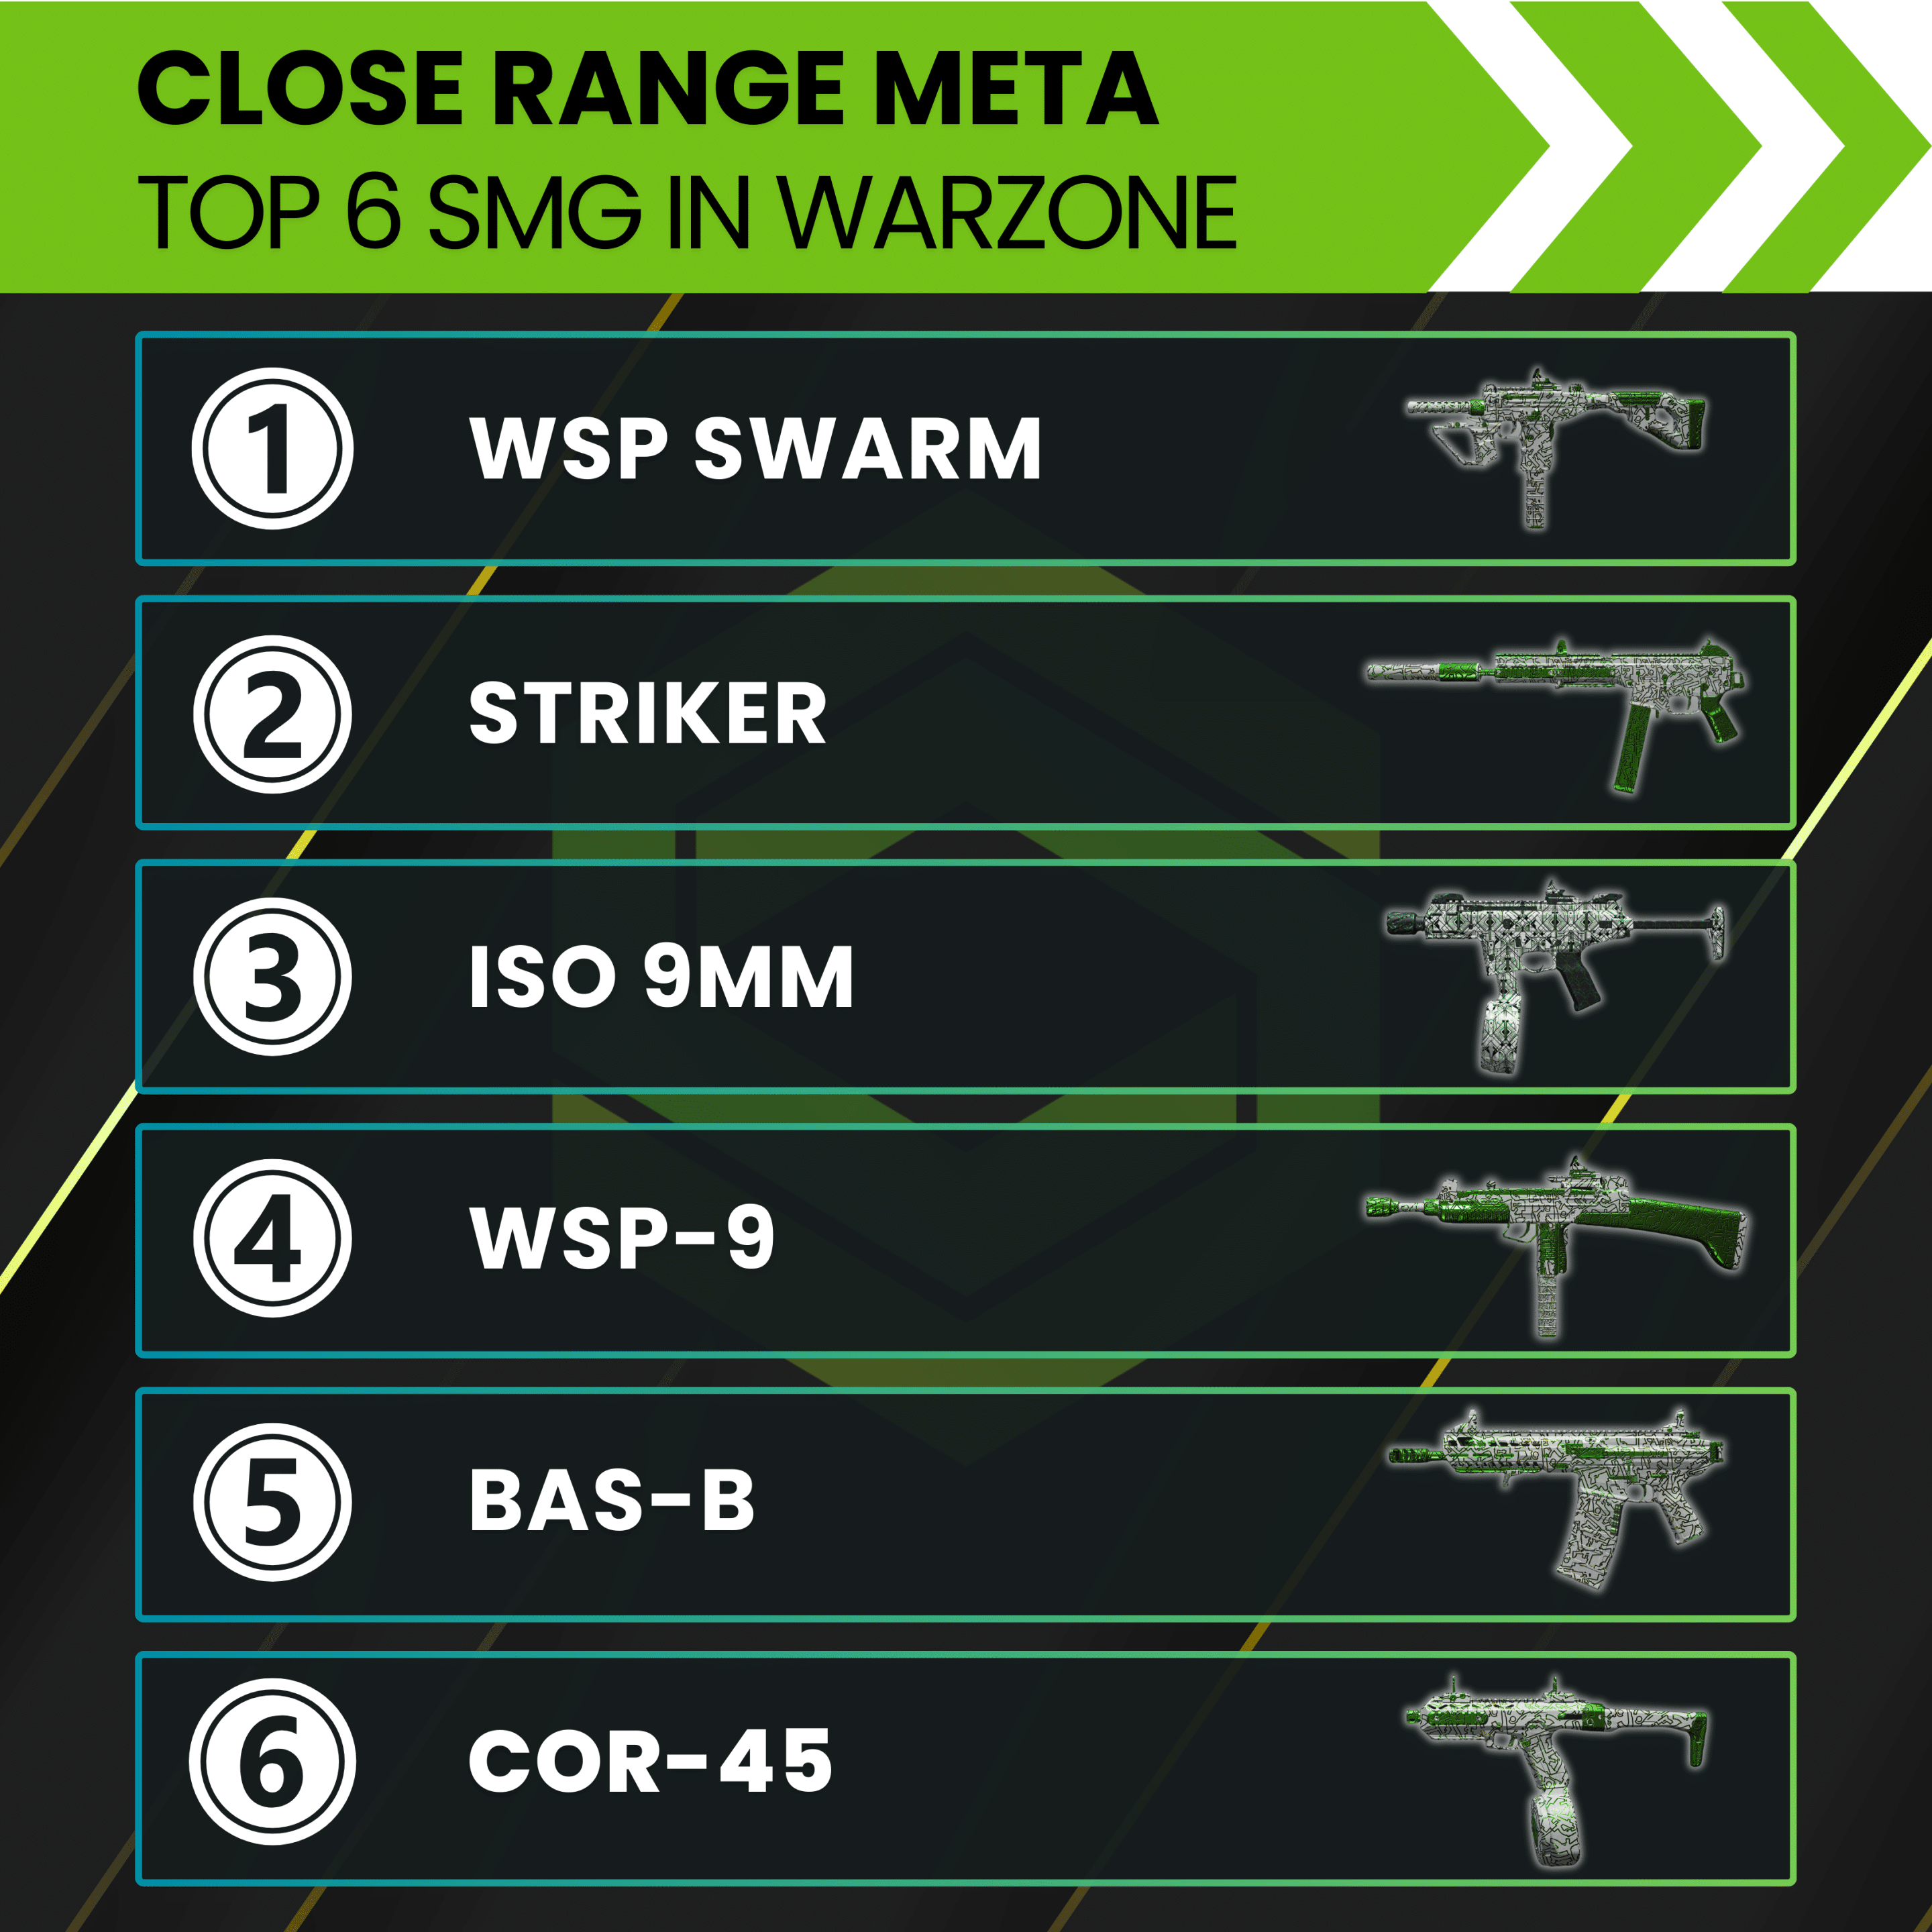 Warzone 2 pistol is so “overpowered” it actually dominates meta